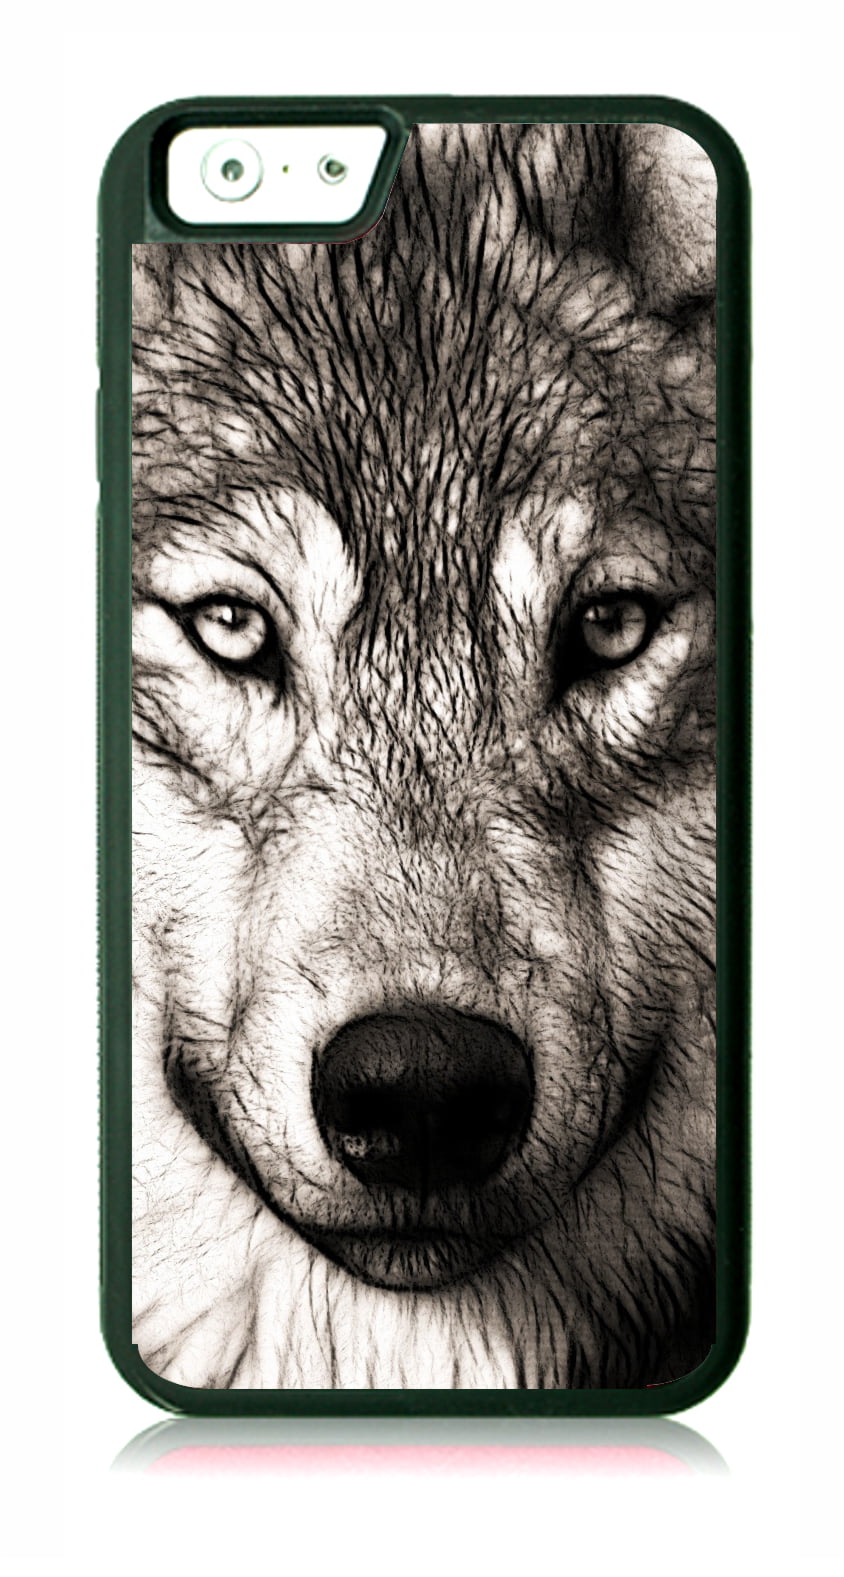 Grey Wolf Up Close Design Black Rubber Case for the Apple iPhone 6 Plus / iPhone 6s Plus - Apple iPhone 6 Plus Accessories -iPhone 6s Plus Accessories